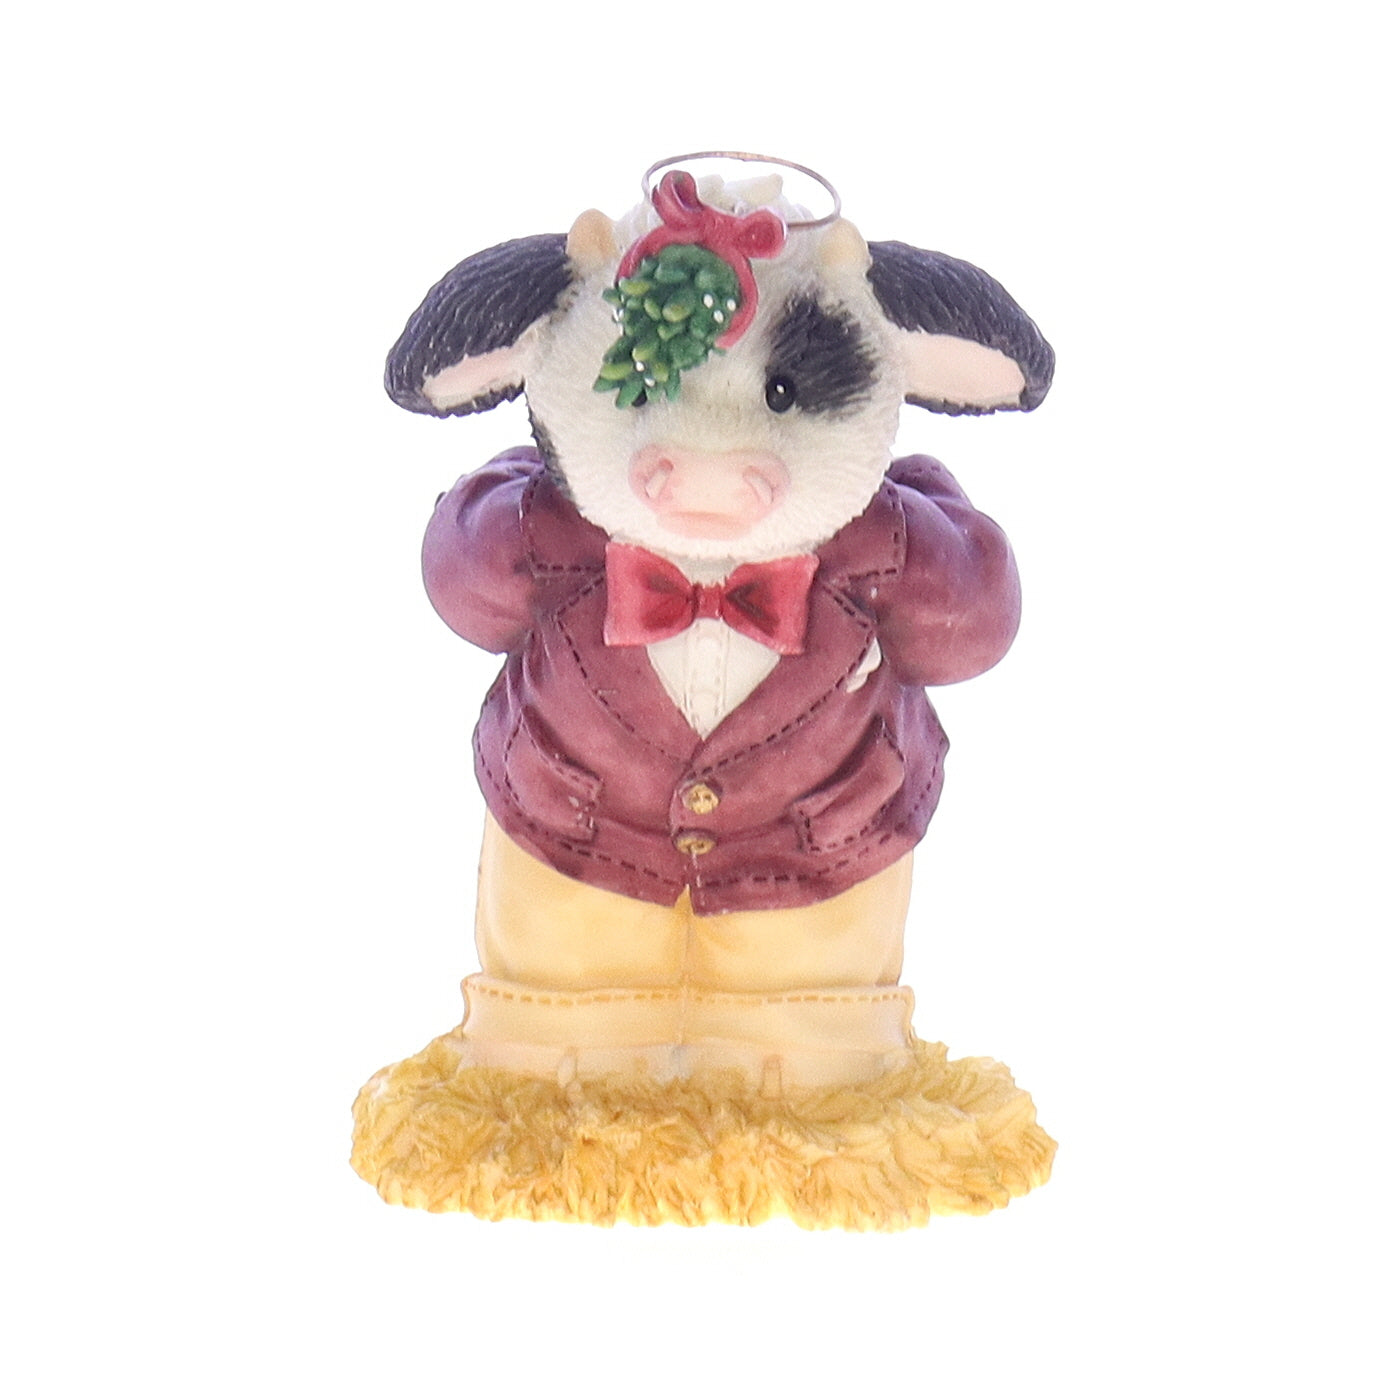 Marys_Moo_Moos_480959_Me_And_Moo_Under_The_Mistletoe_Christmas_Figurine_1999 Front View